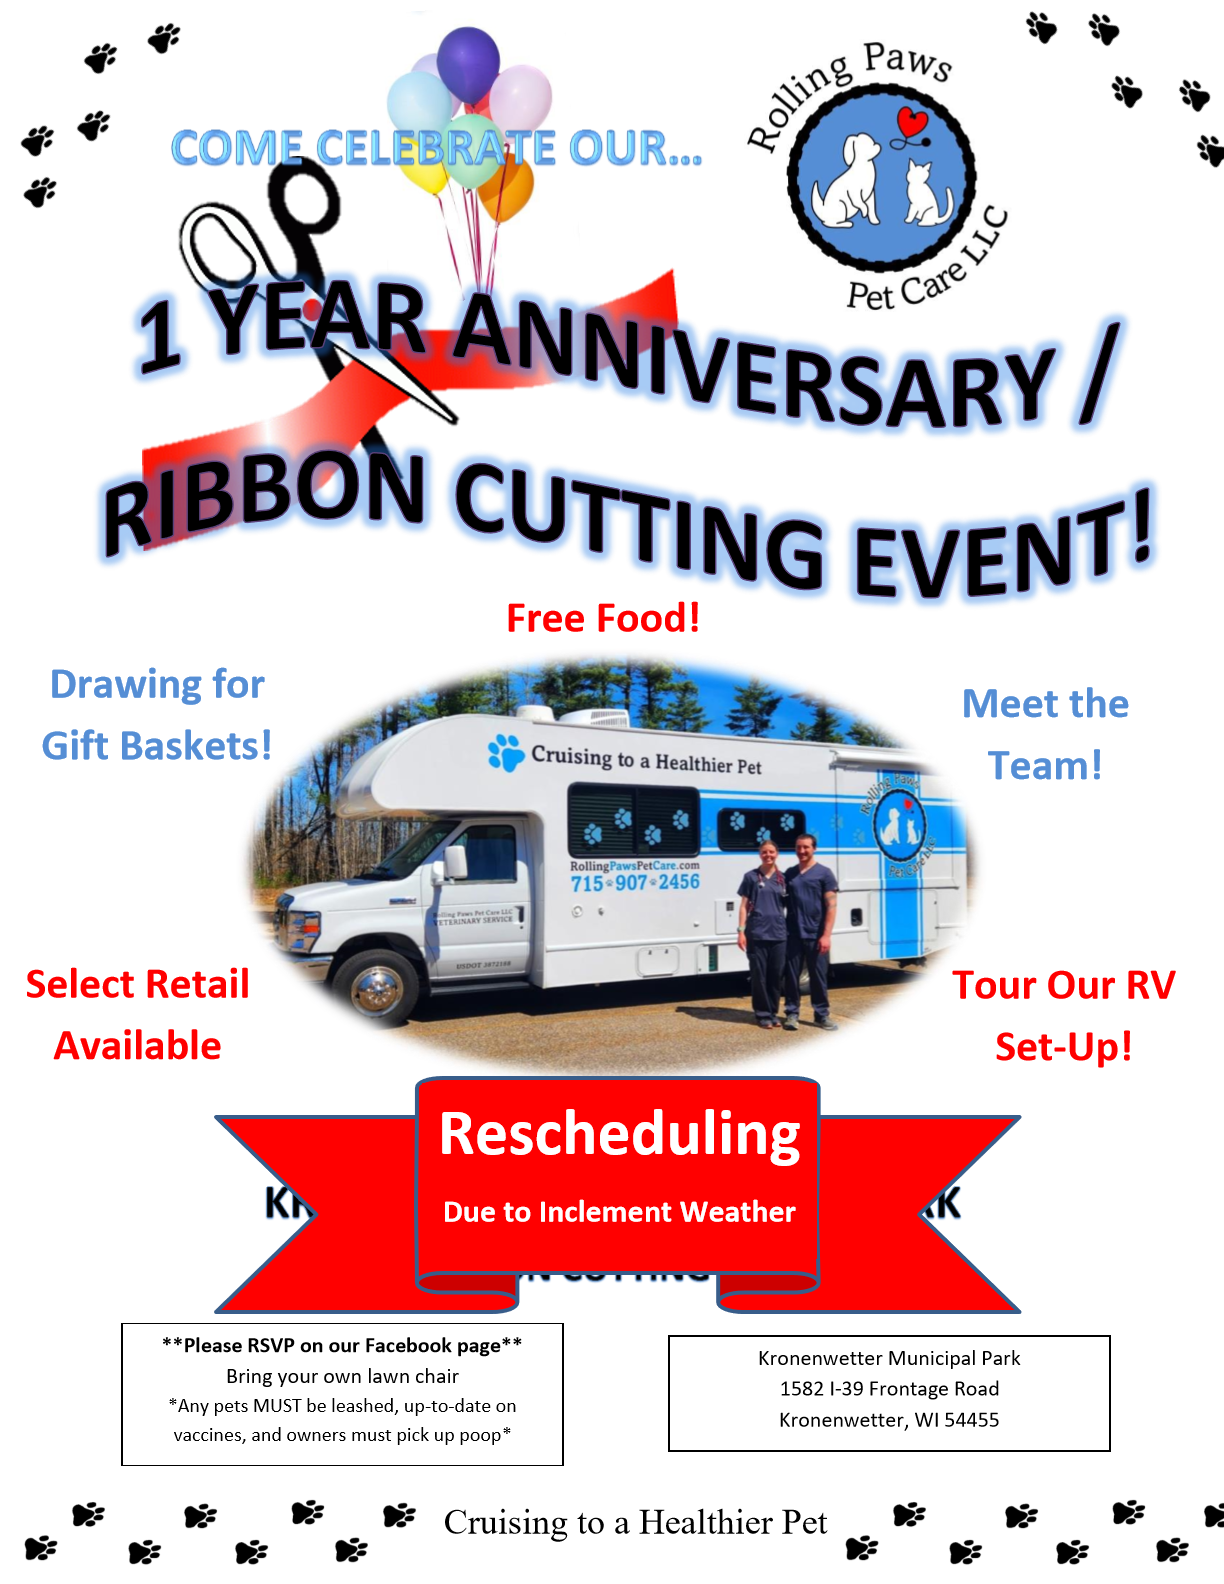 1 Year Anniversary Ribbon Cutting Ceremony Flyer Reschedule